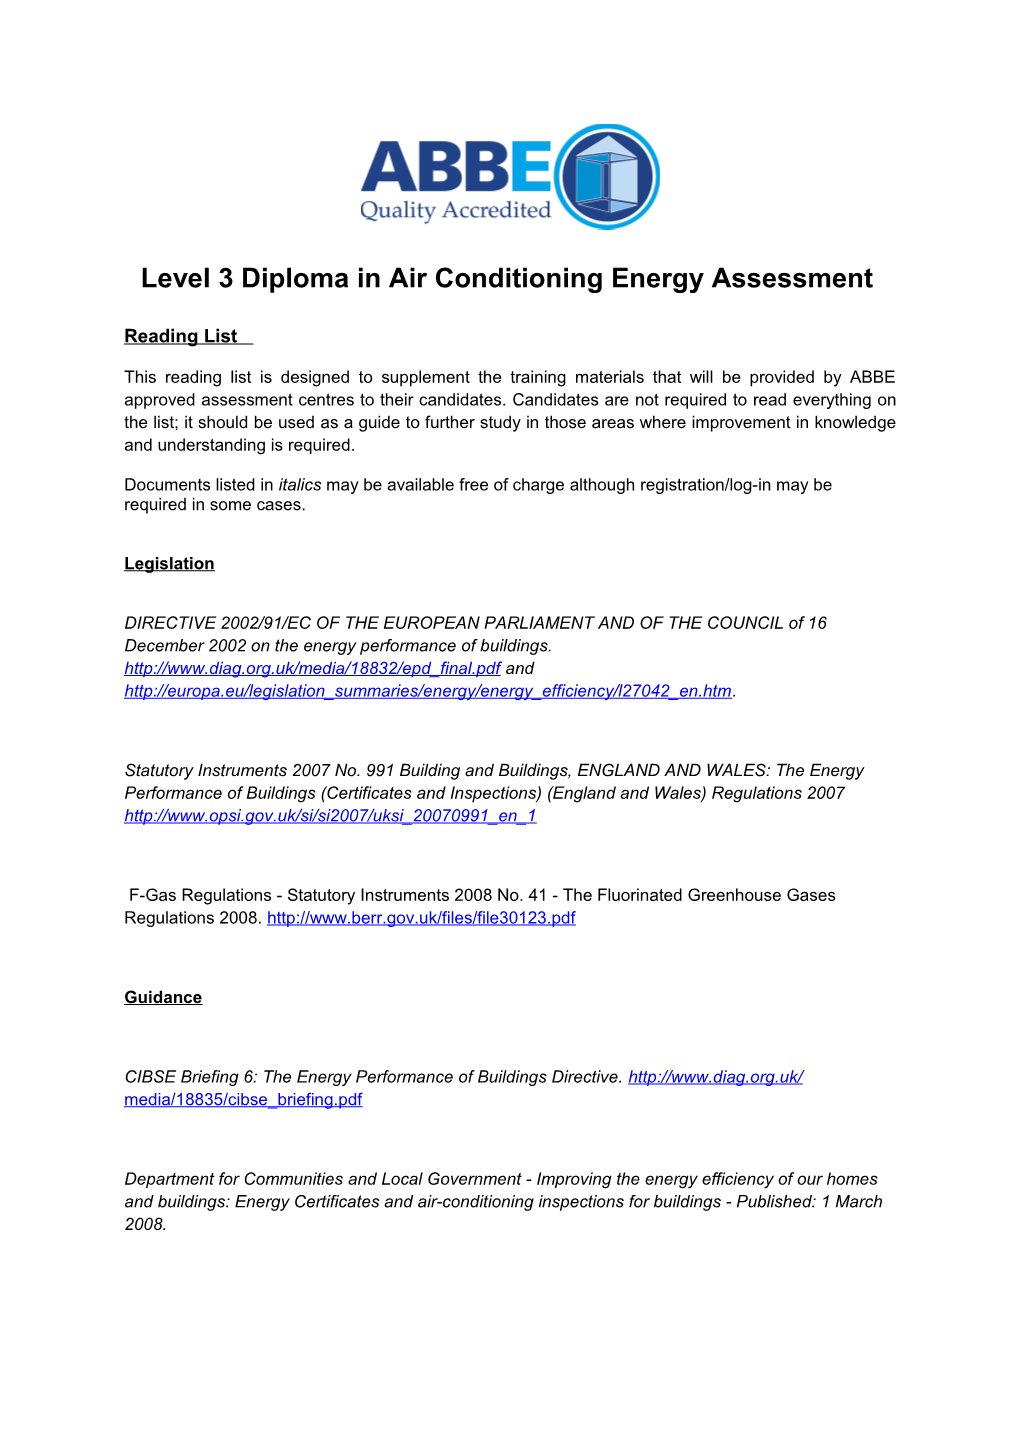 Level 3 Diploma in Air Conditioning Energy Assessment